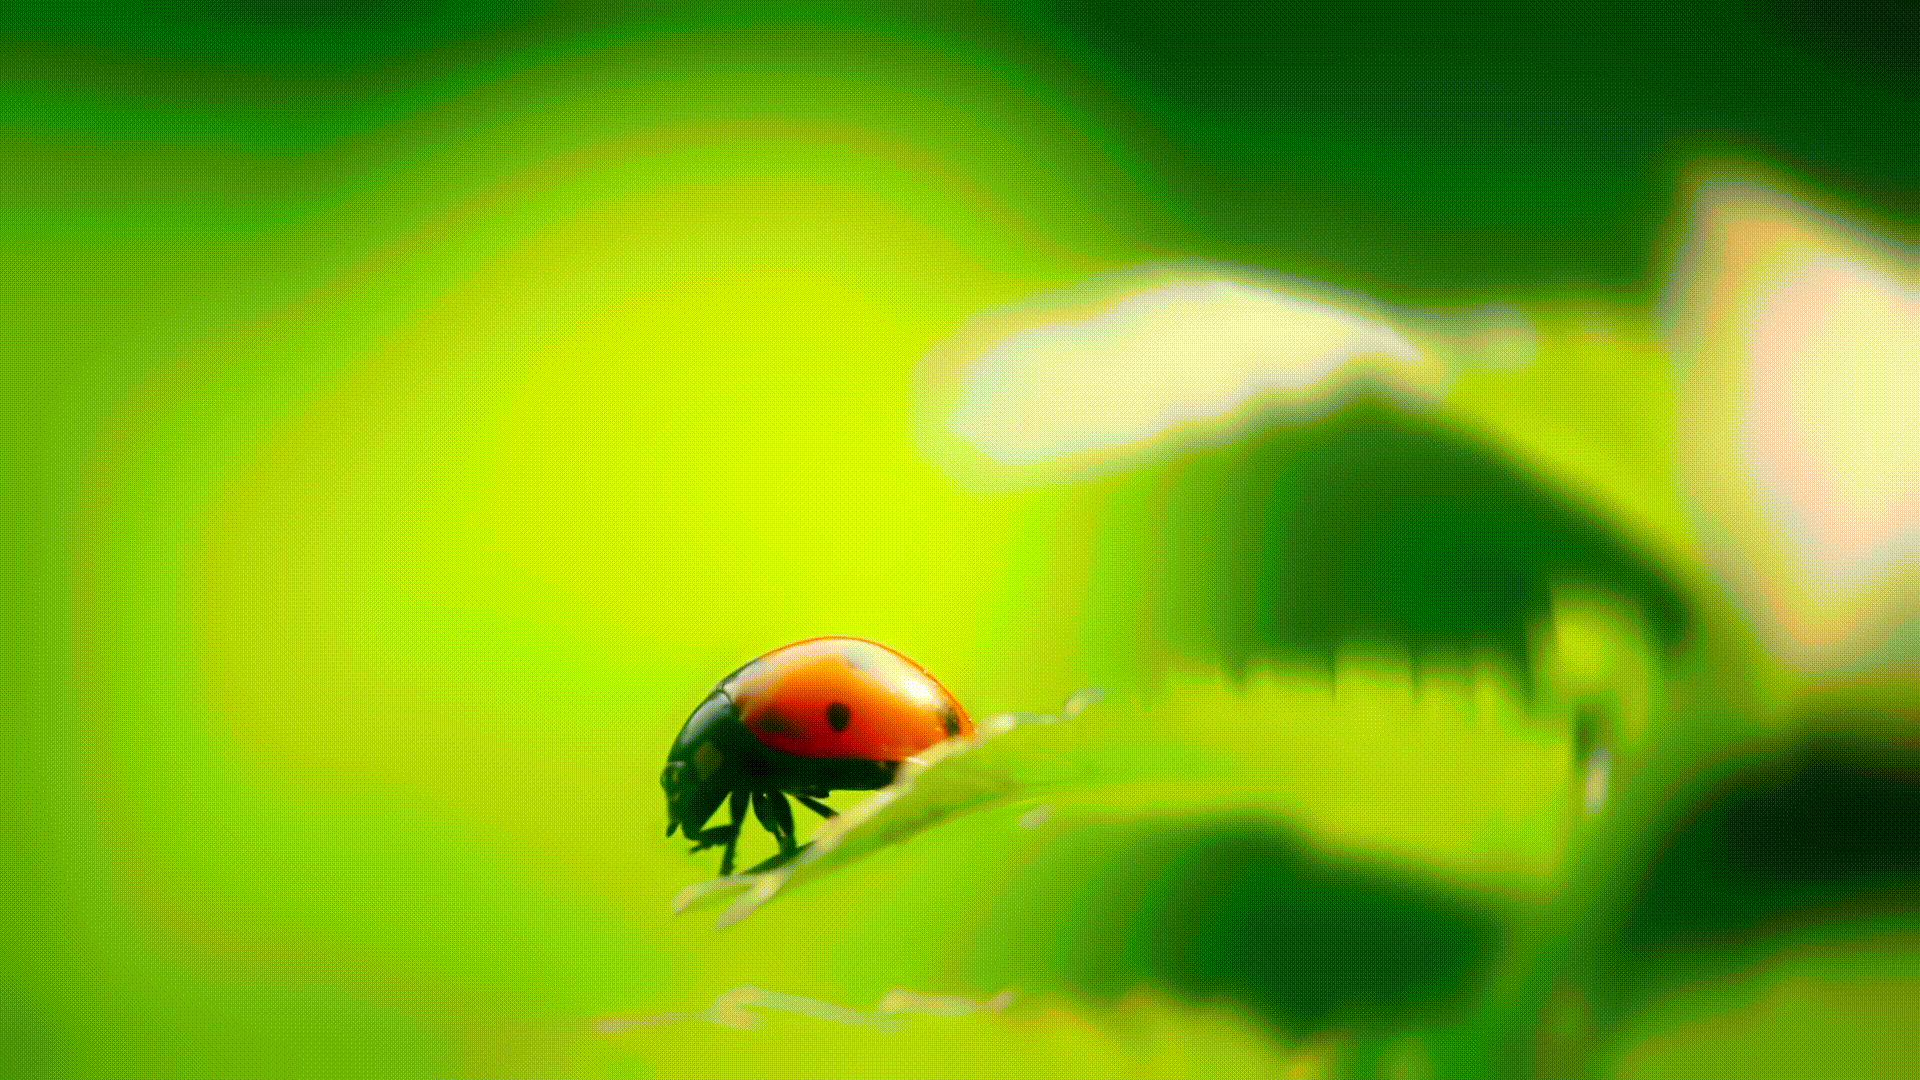 ladybird-insect-on-natural-spring-background-2021-08-30-01-53-08-utc